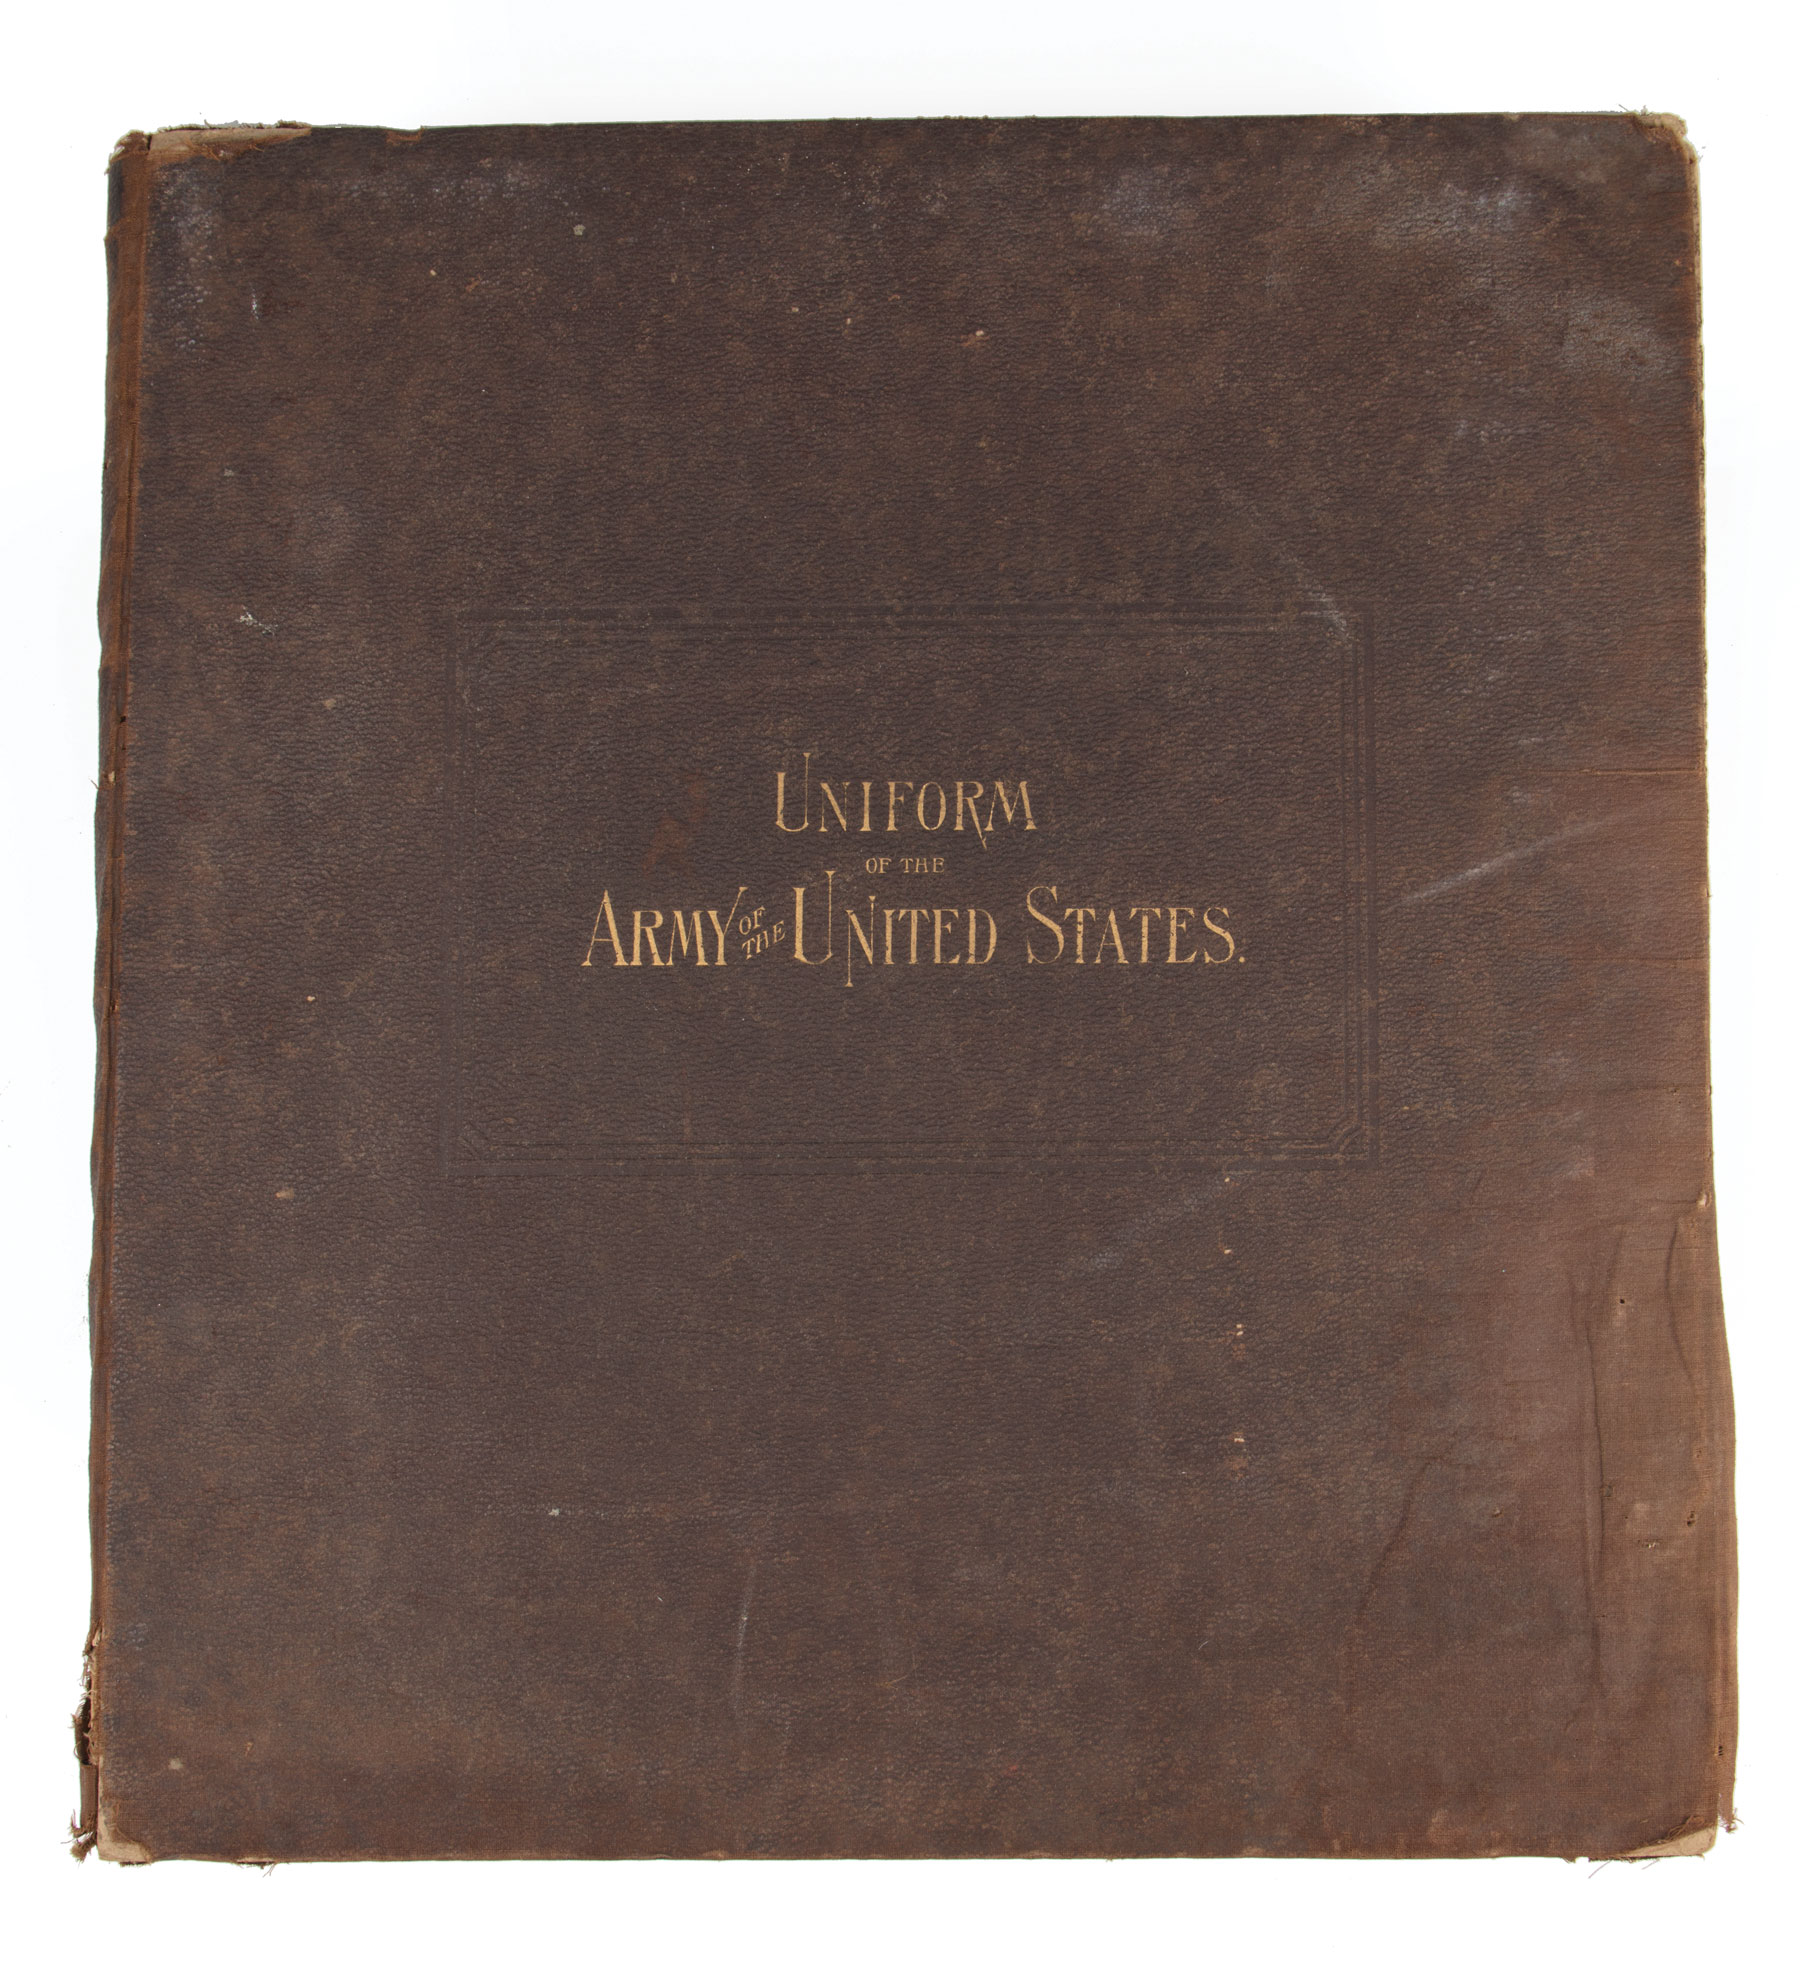 Antique Prints of US Army Uniforms, Regulations for the Uniform of the Army of the United States